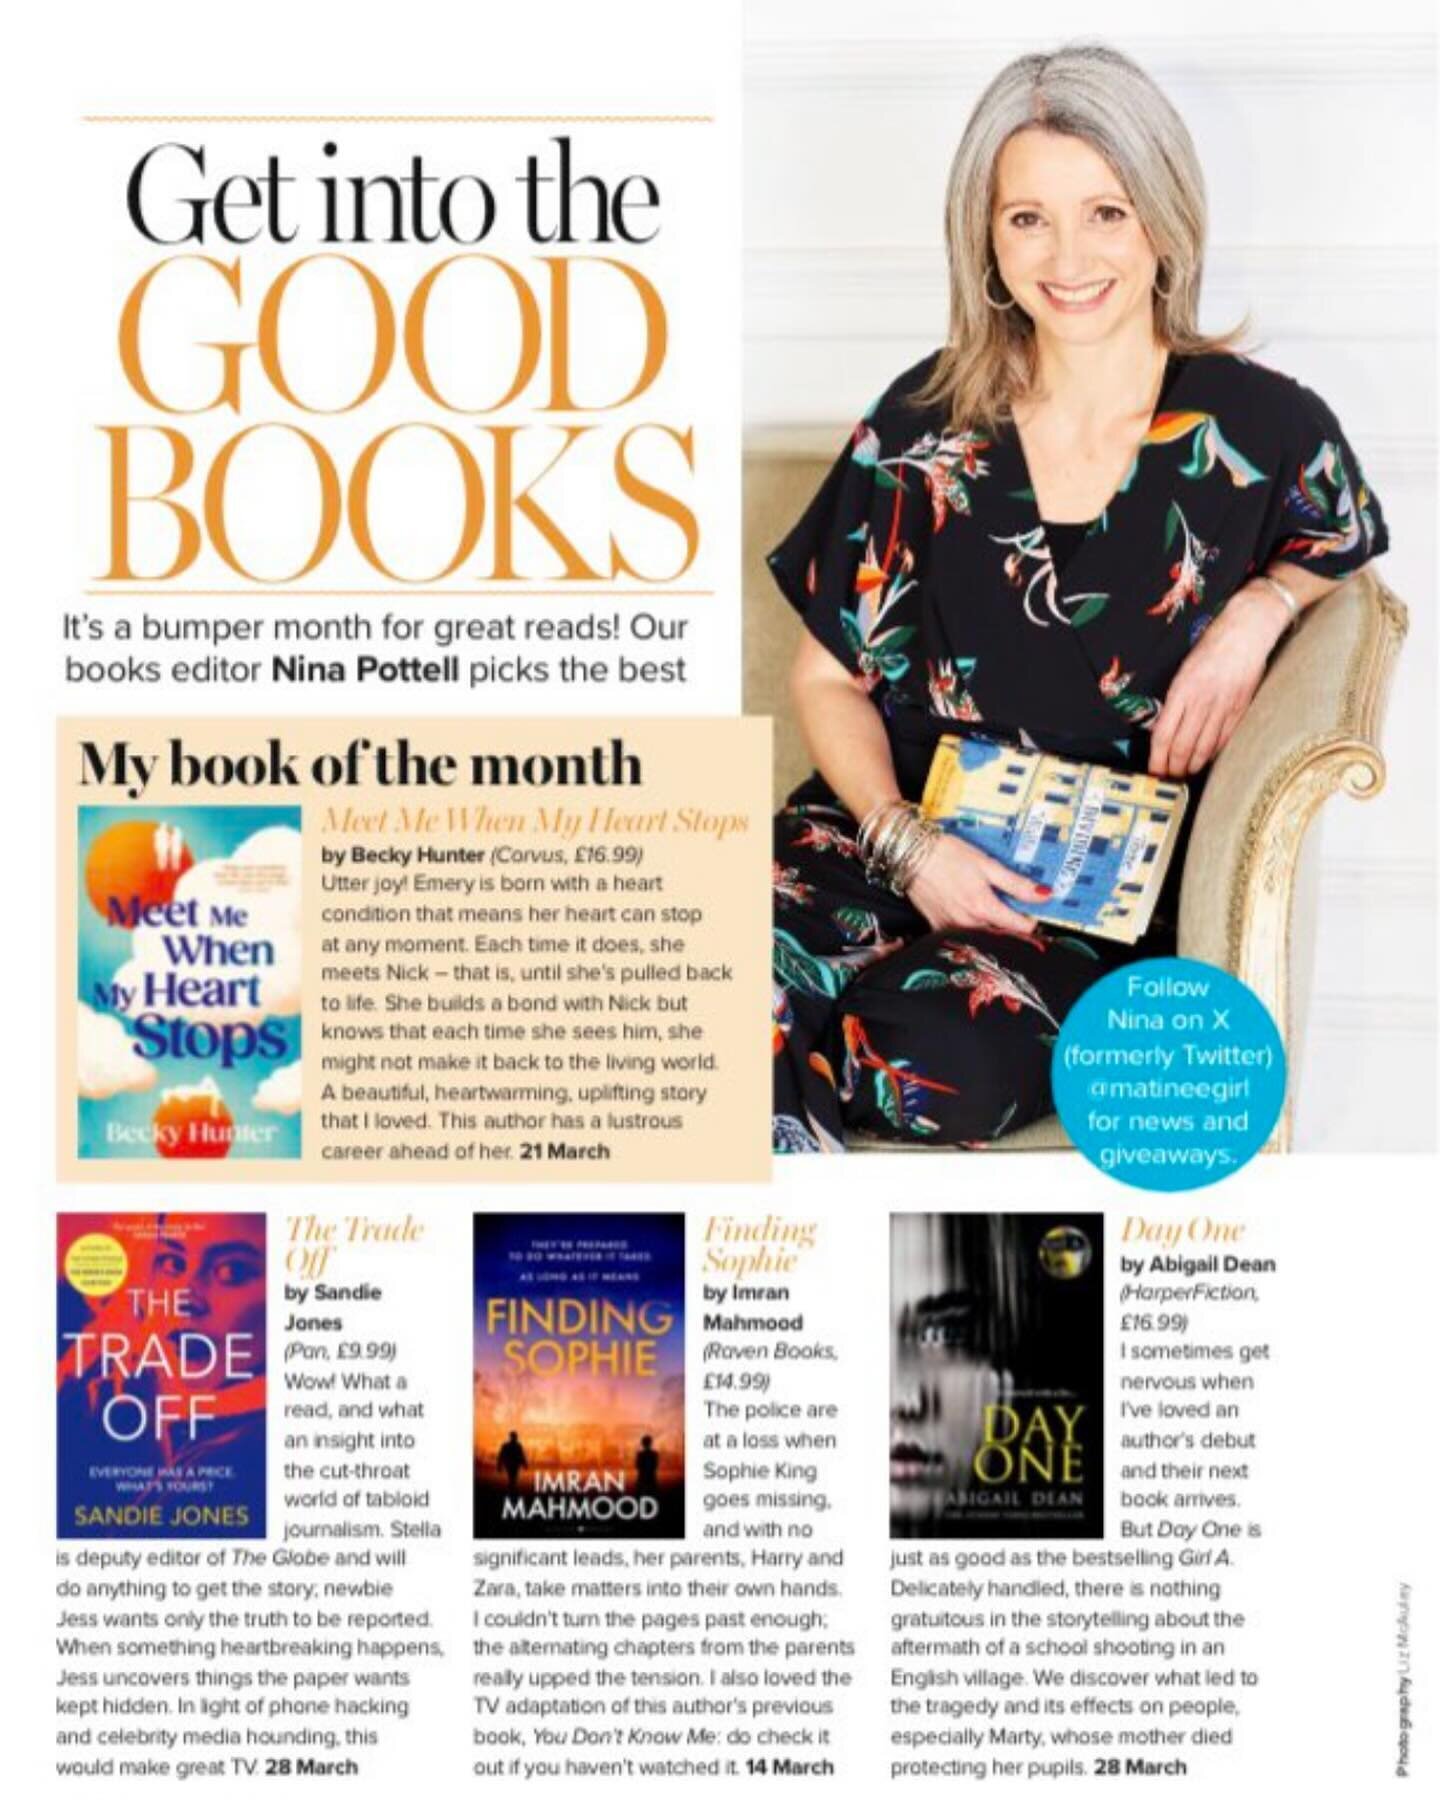 It&rsquo;s the 1st March and that means I can say, &lsquo;my new book&rsquo; is out this month! It also means that @primamag have selected their books of the month and I&rsquo;m so thrilled that #TheTradeOff has been chosen 🥰
&ldquo;Wow, what a read